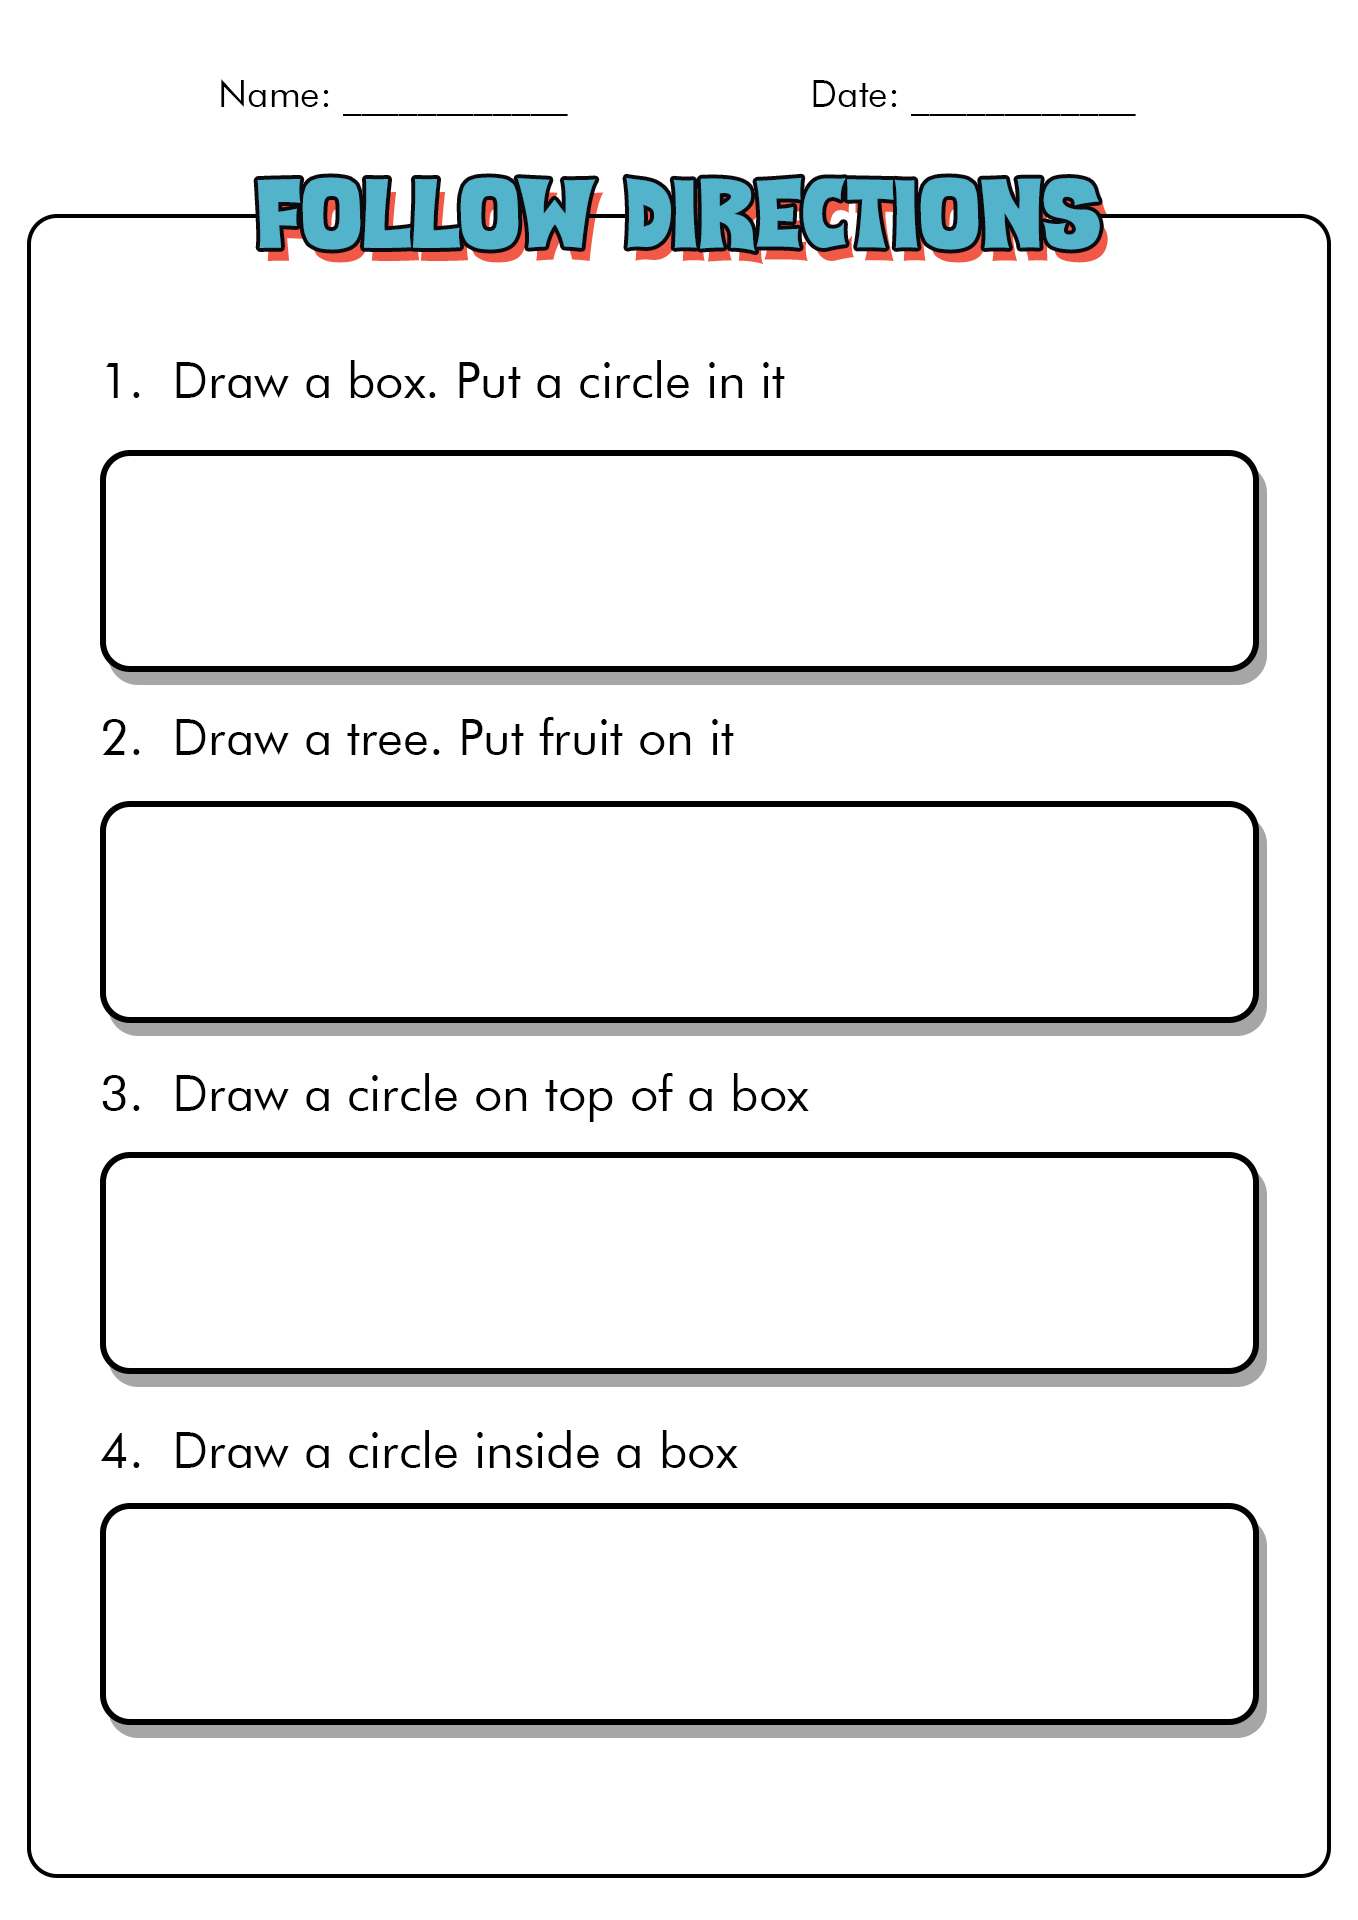 Following Directions Activity Worksheet